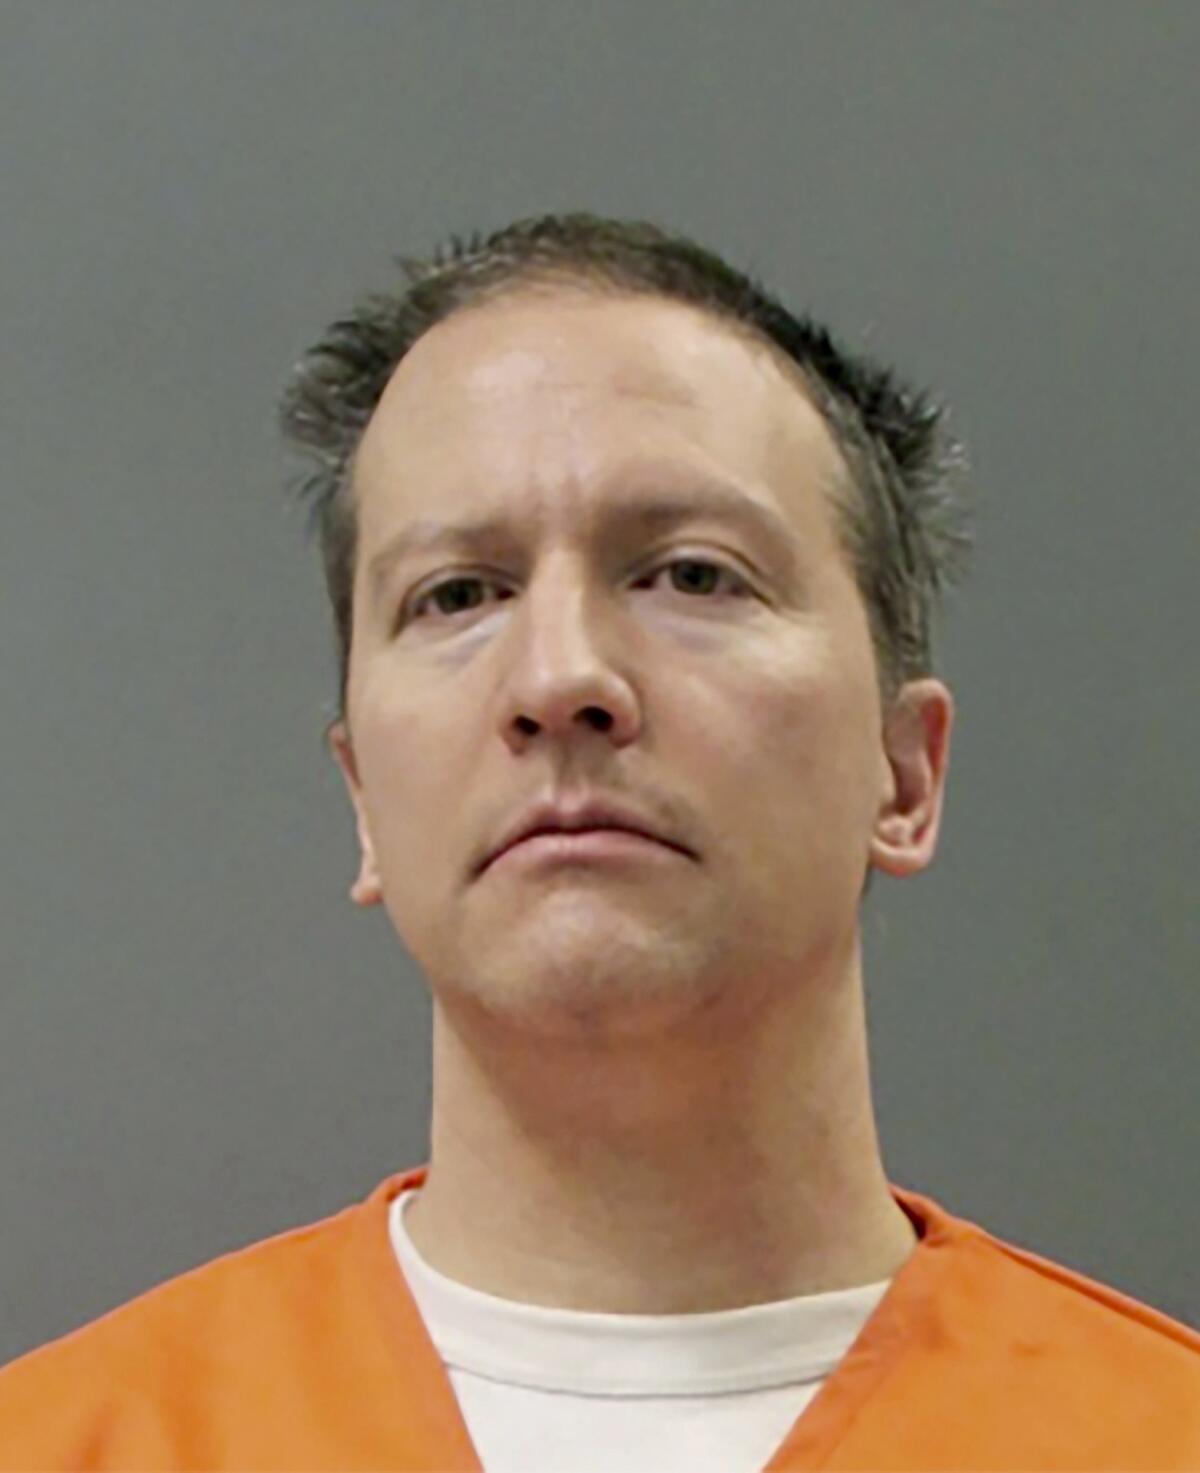 Convicted former police officer Derek Chauvin's jail booking photo